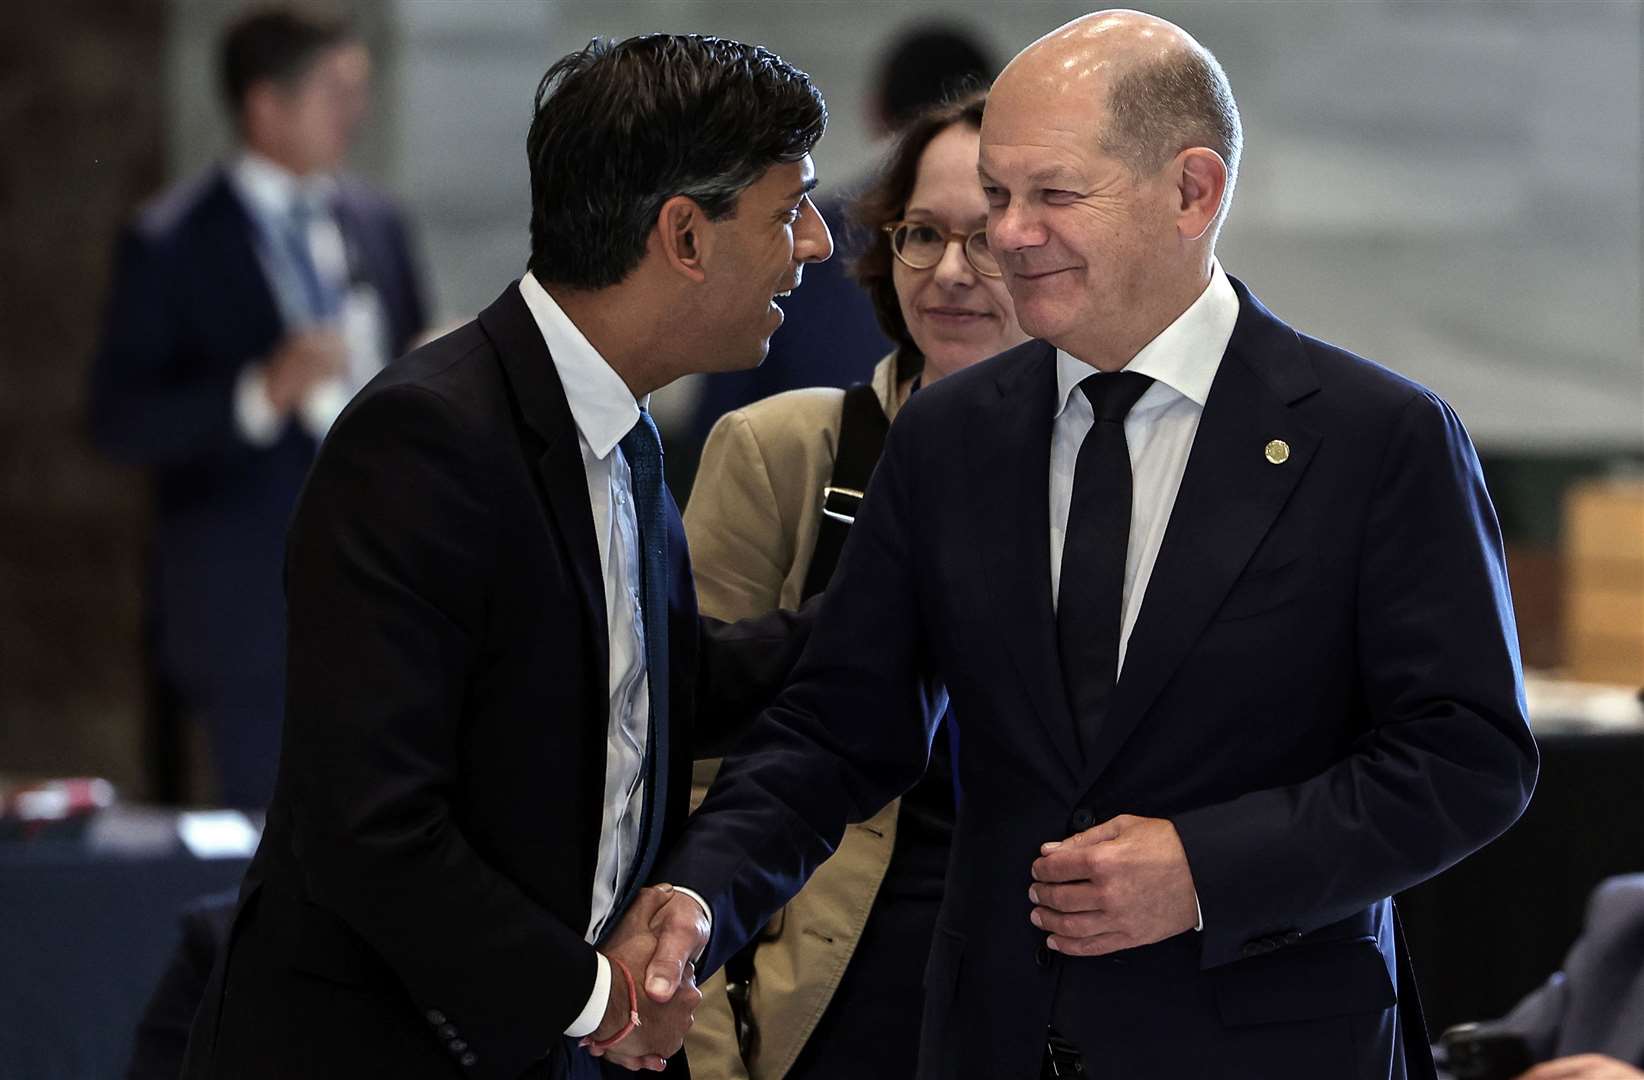 Rishi Sunak met German Chancellor Olaf Scholz at the European Political Community summit in Spain in October (Thomas Coex/PA)